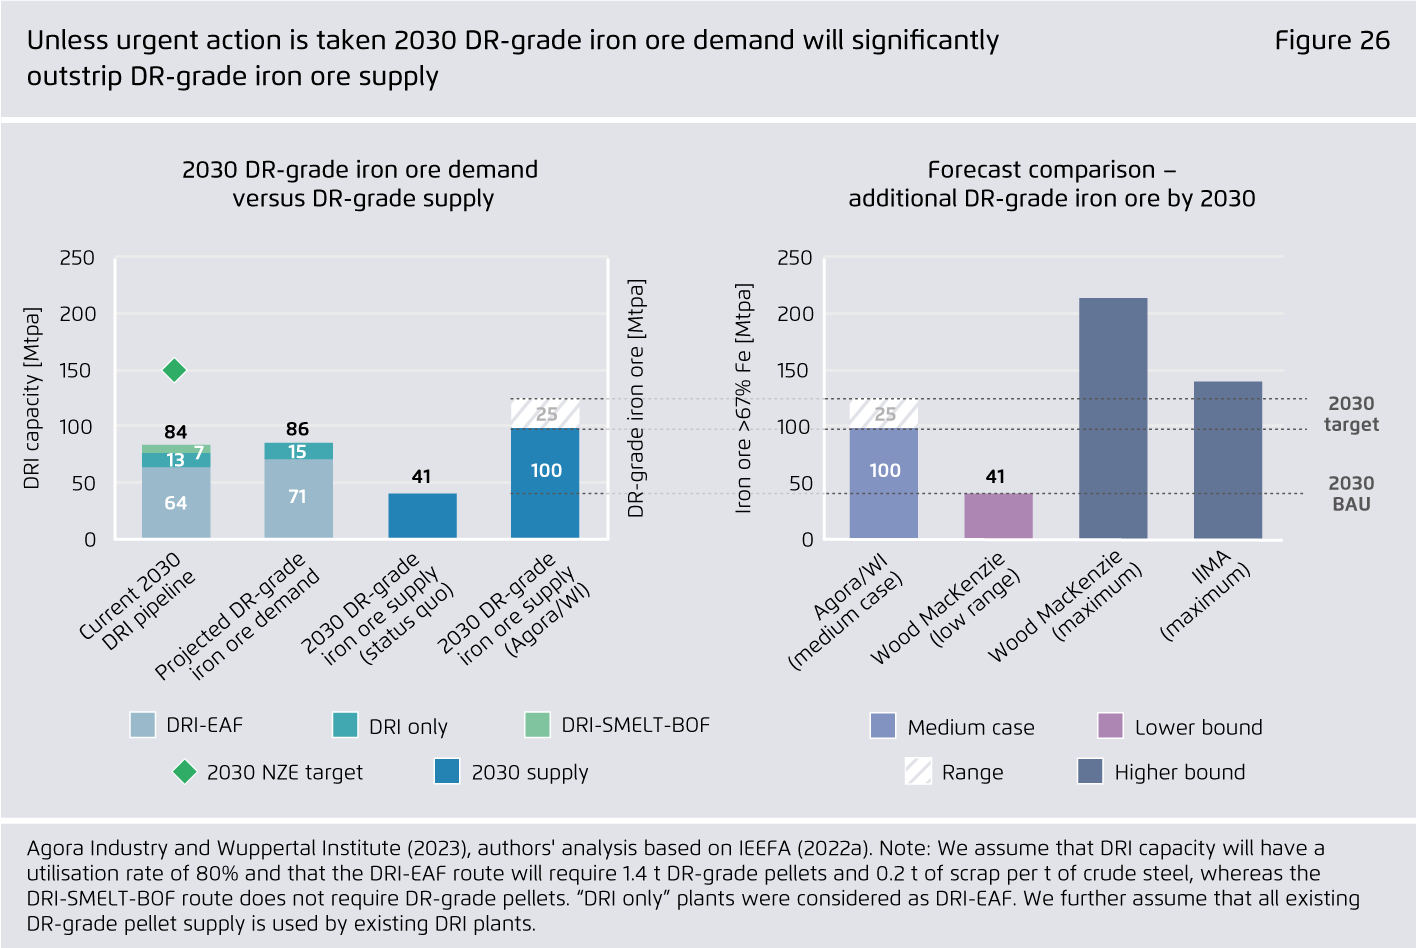 Preview for Unless urgent action is taken 2030 DR-grade iron ore demand will significantly outstrip DR-grade iron ore supply